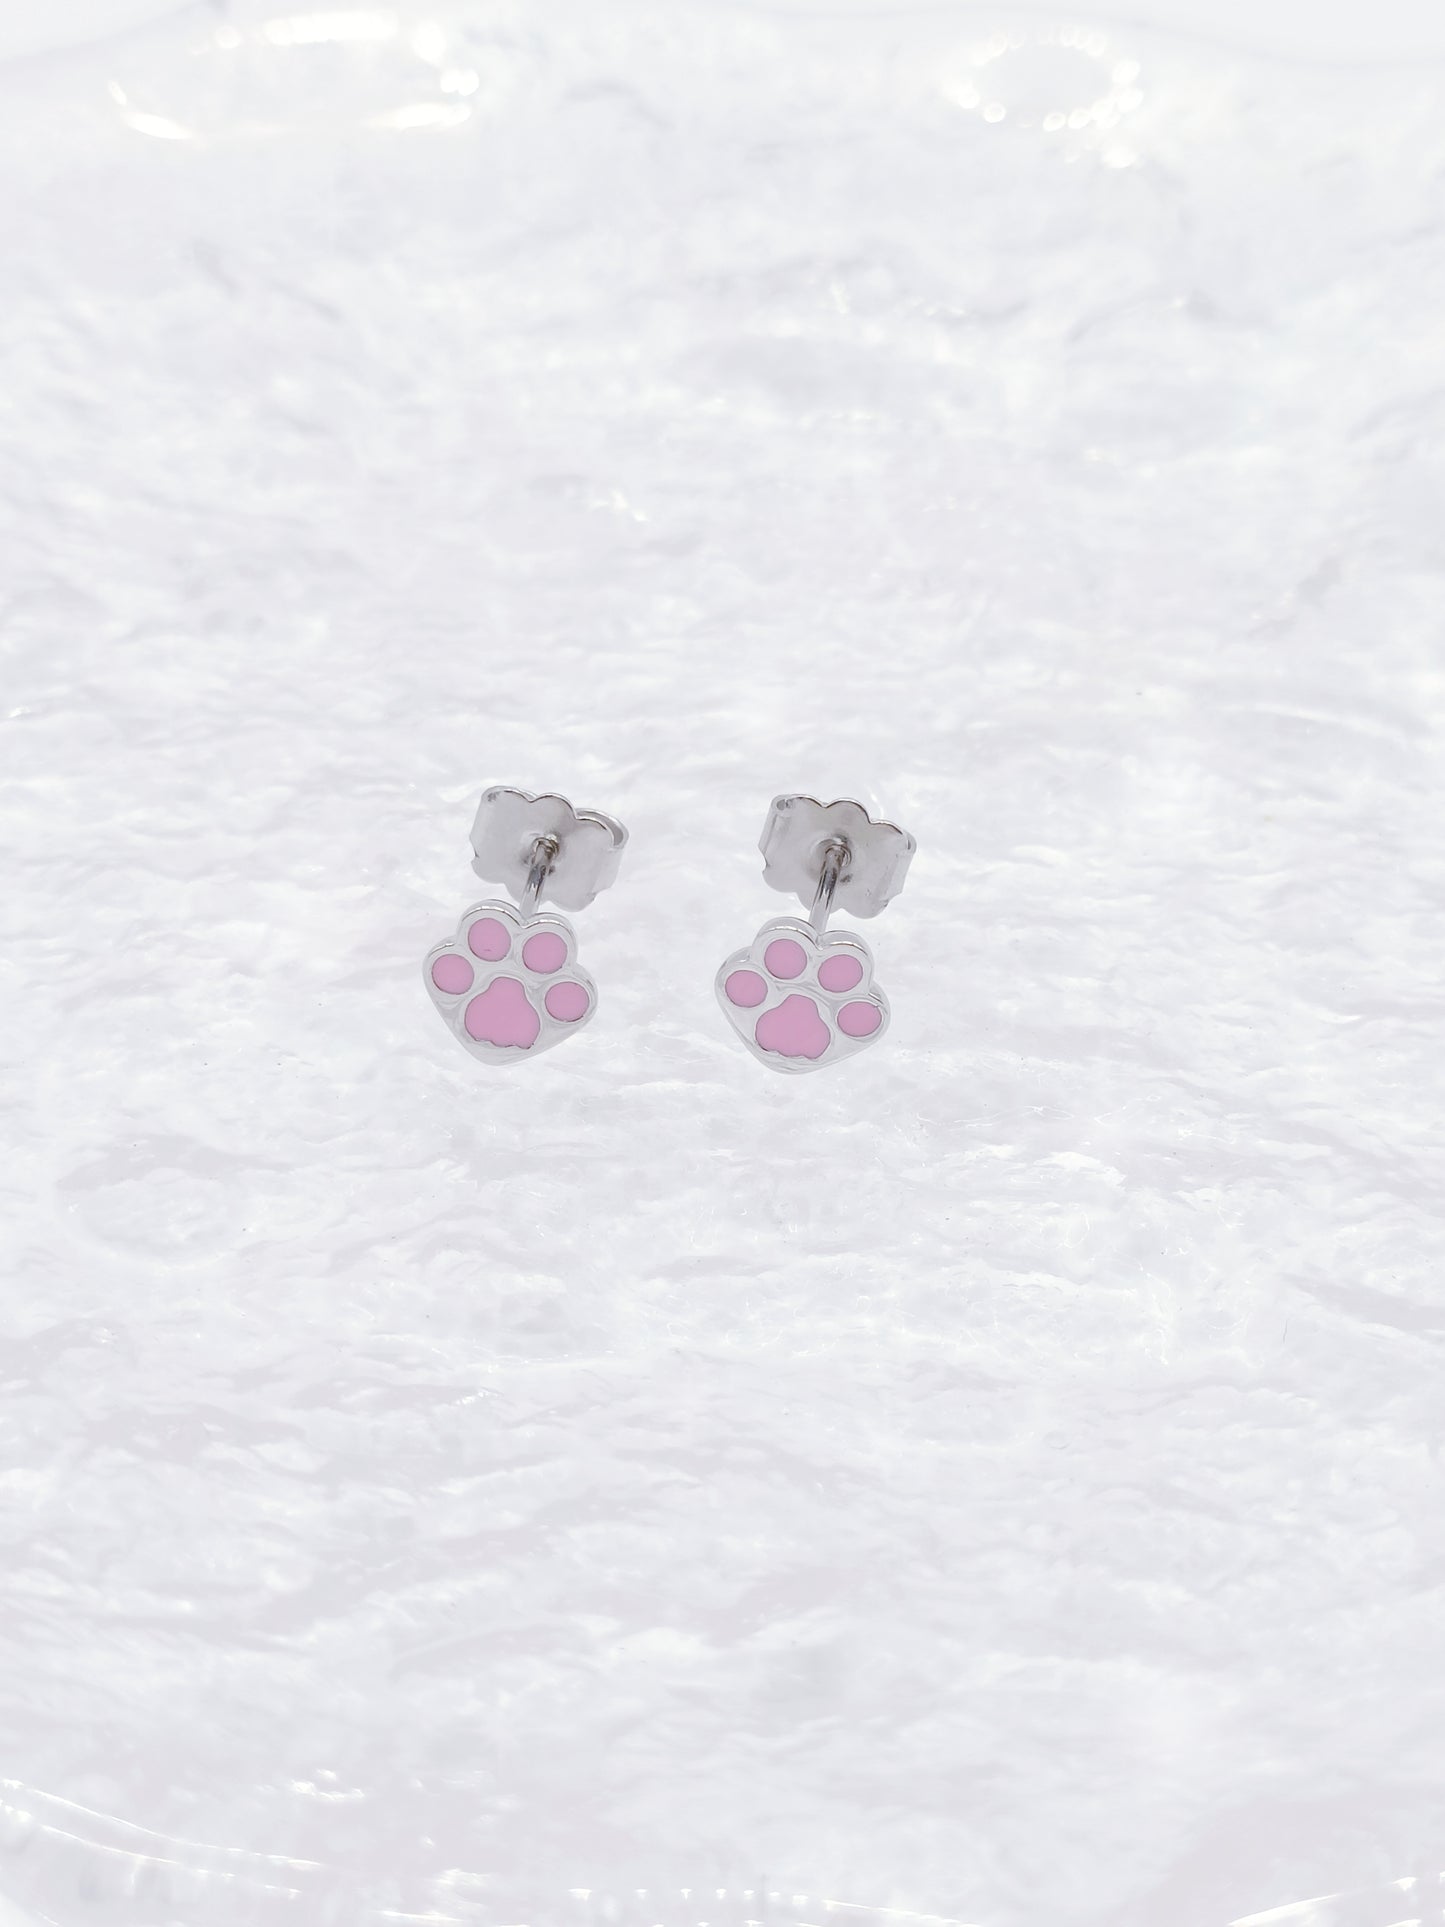 【Luxcellent x CreaMint】LAFS (Love at First Sight) Earrings